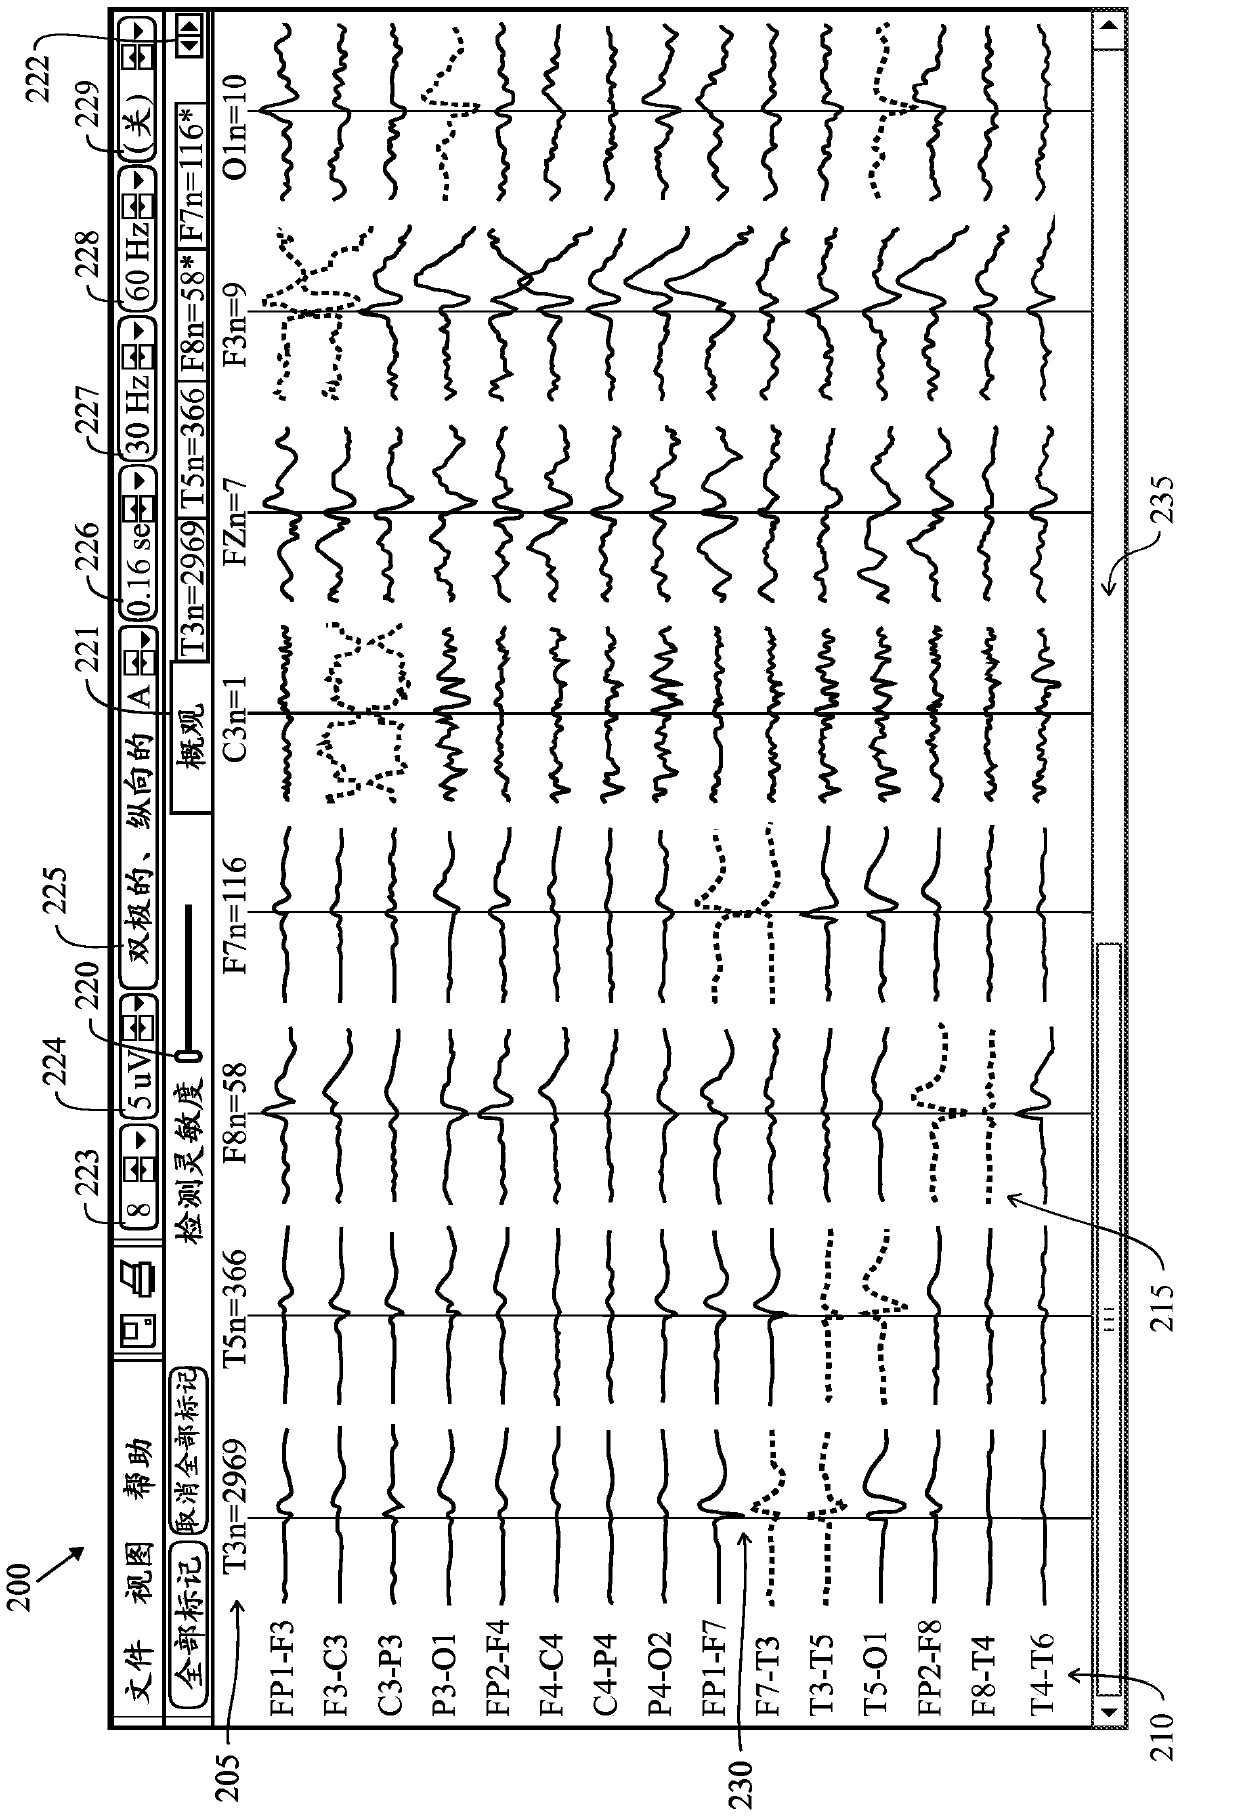 Method and system for analyzing an eeg recording